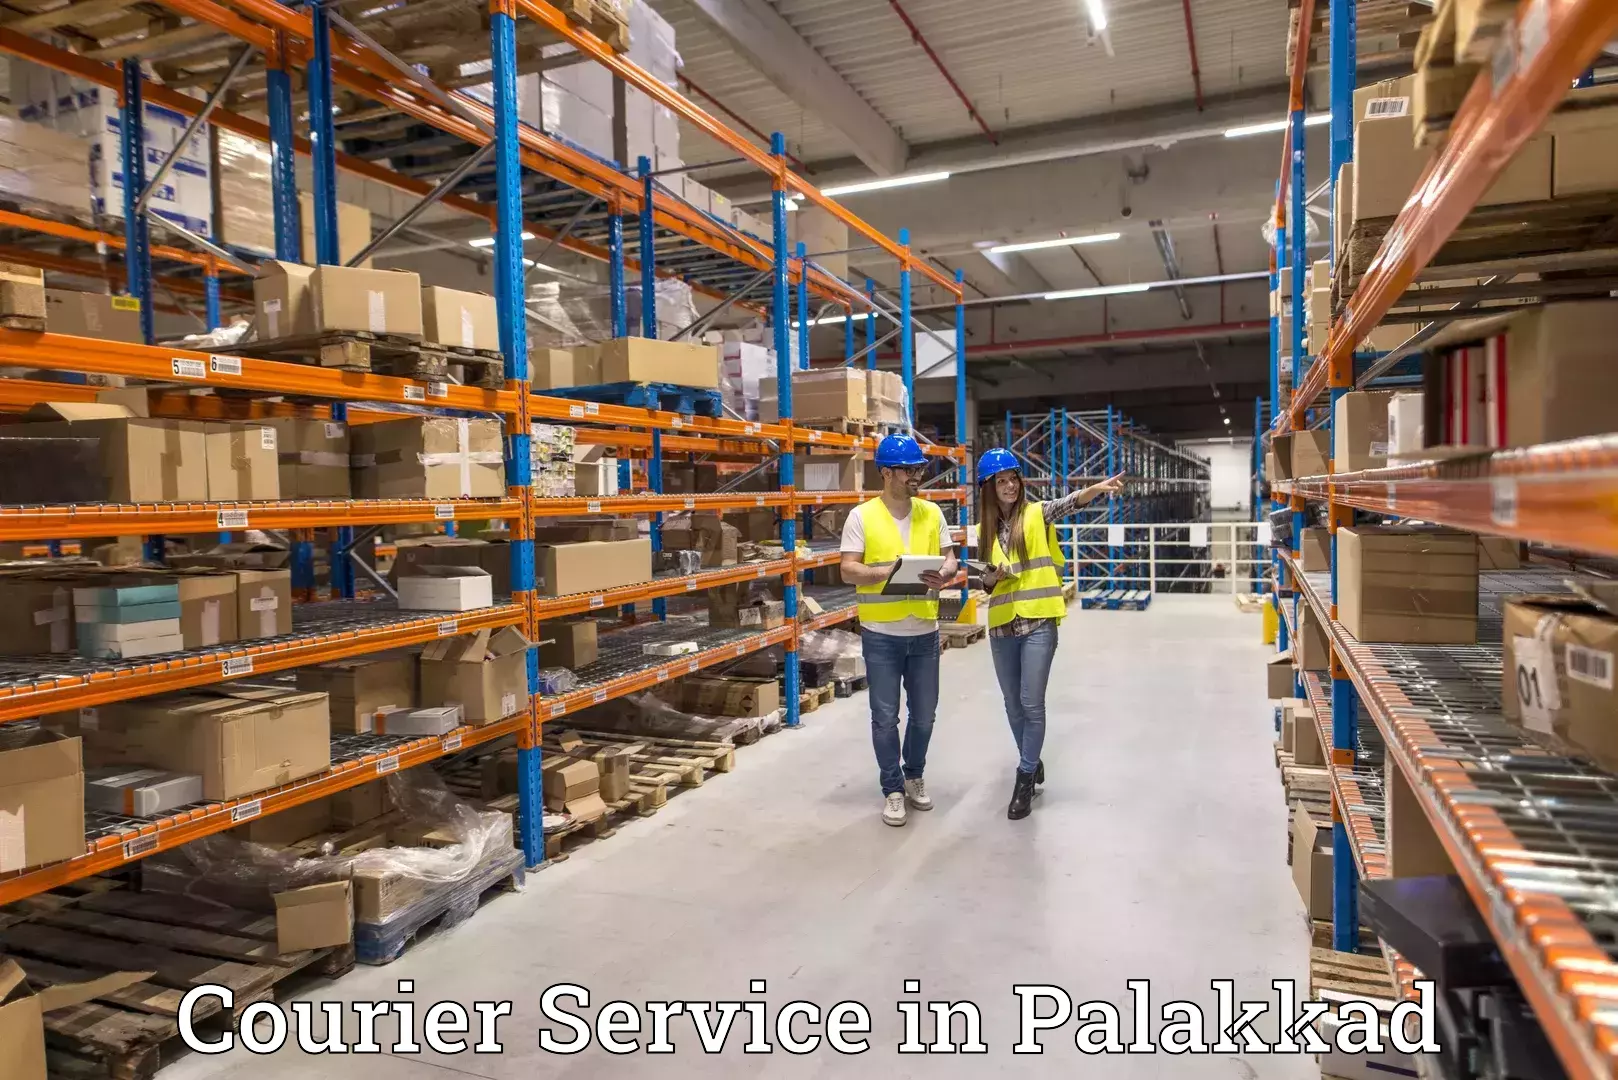 Customer-friendly courier services in Palakkad